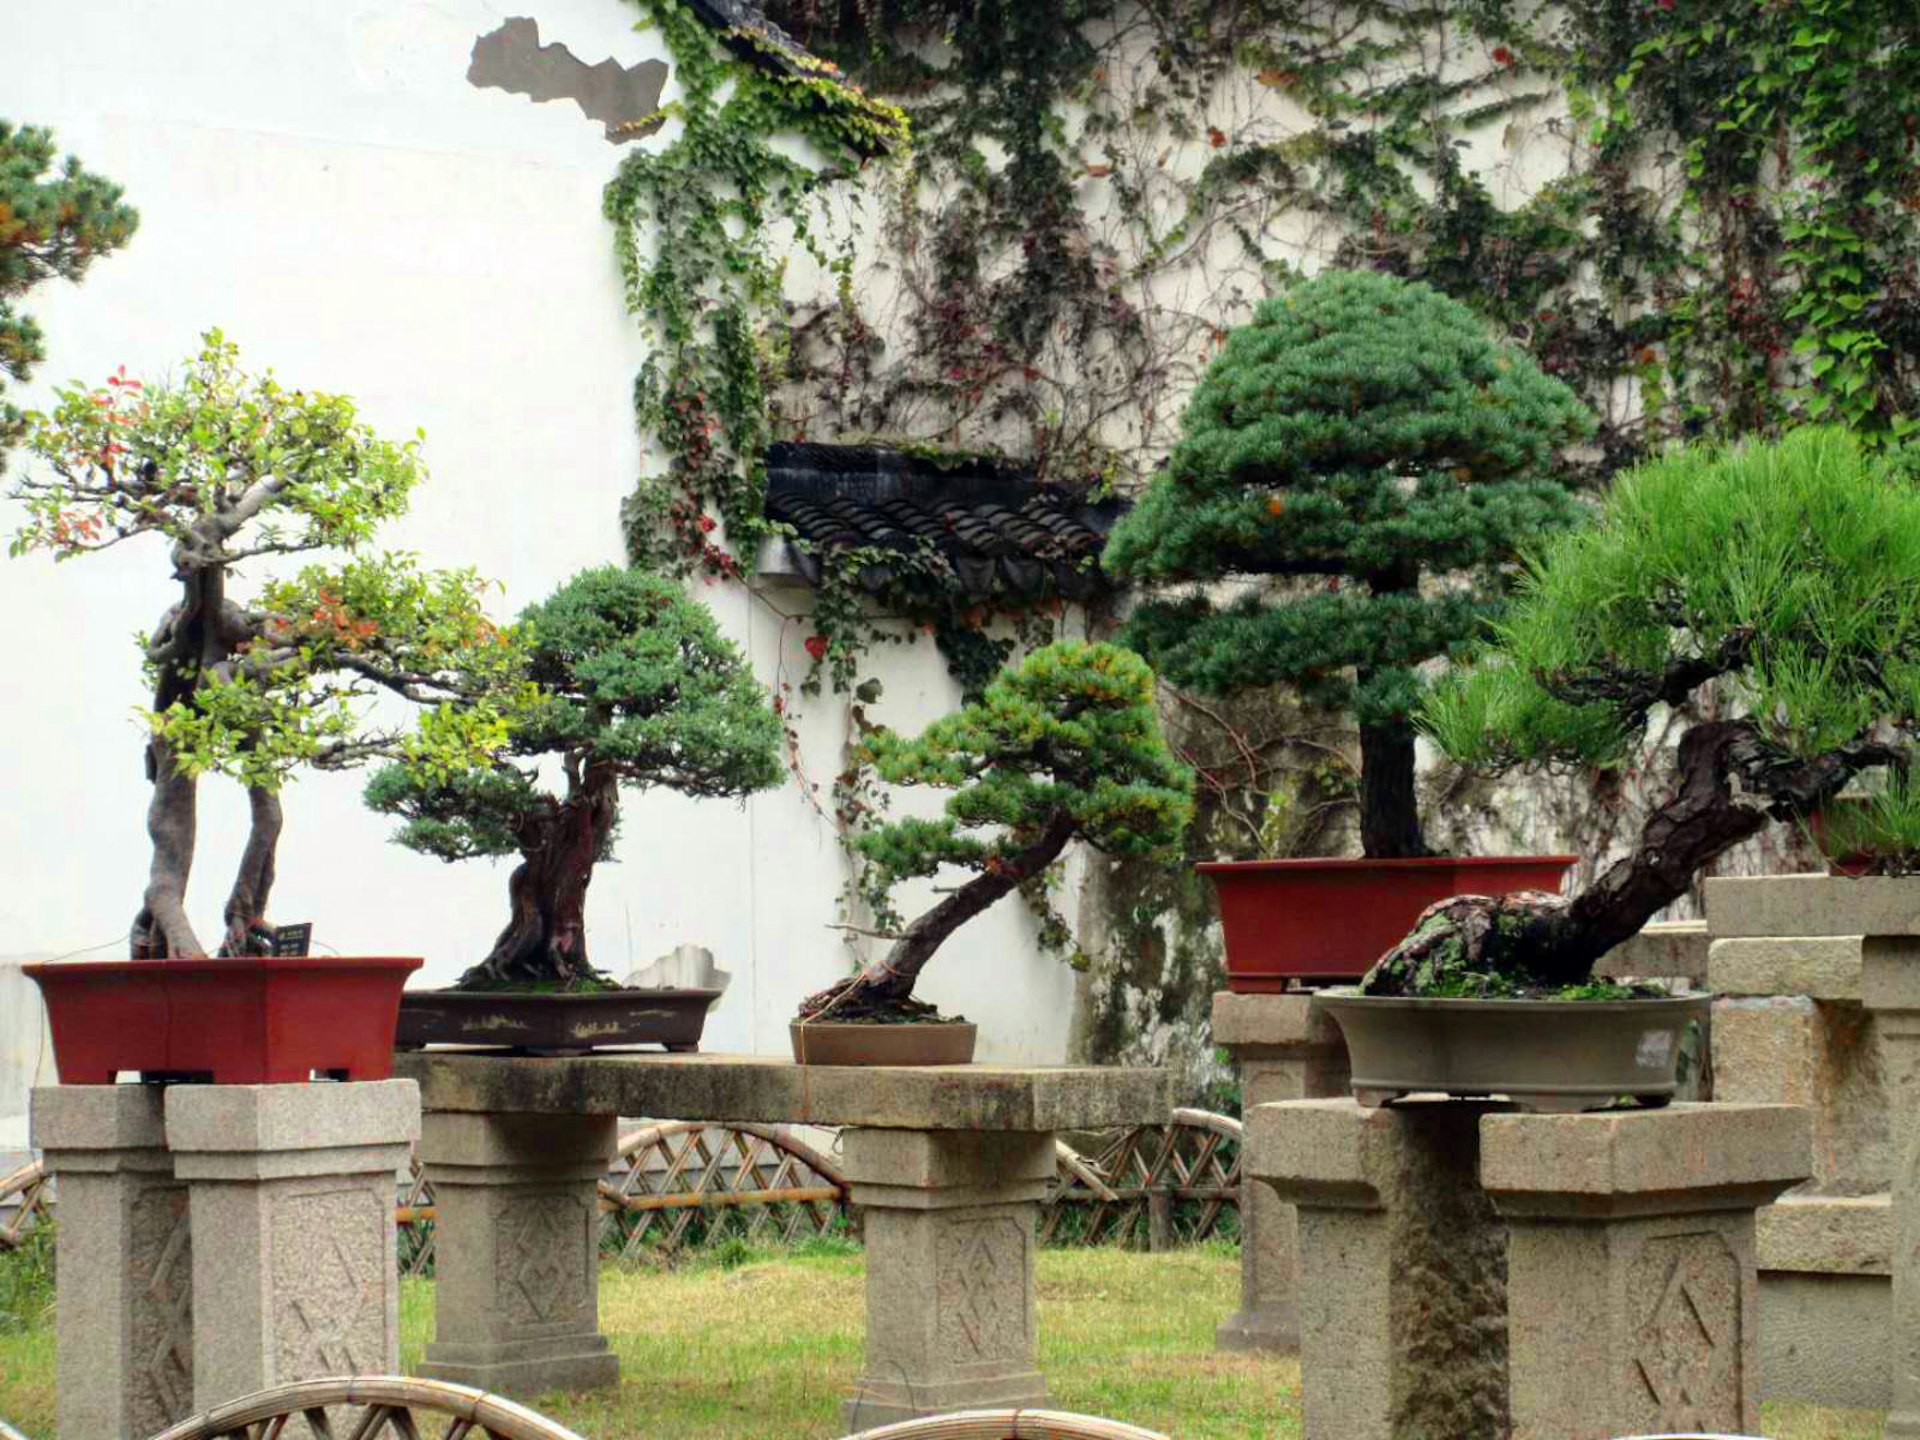 Four miniature evergreen trees on stone platforms in front of a white wall covered in vines. Suzhou's gardens are conceived as microcosms of the natural world, featuring miniature versions of things like trees © Tess Humphrys / Lonely Planet